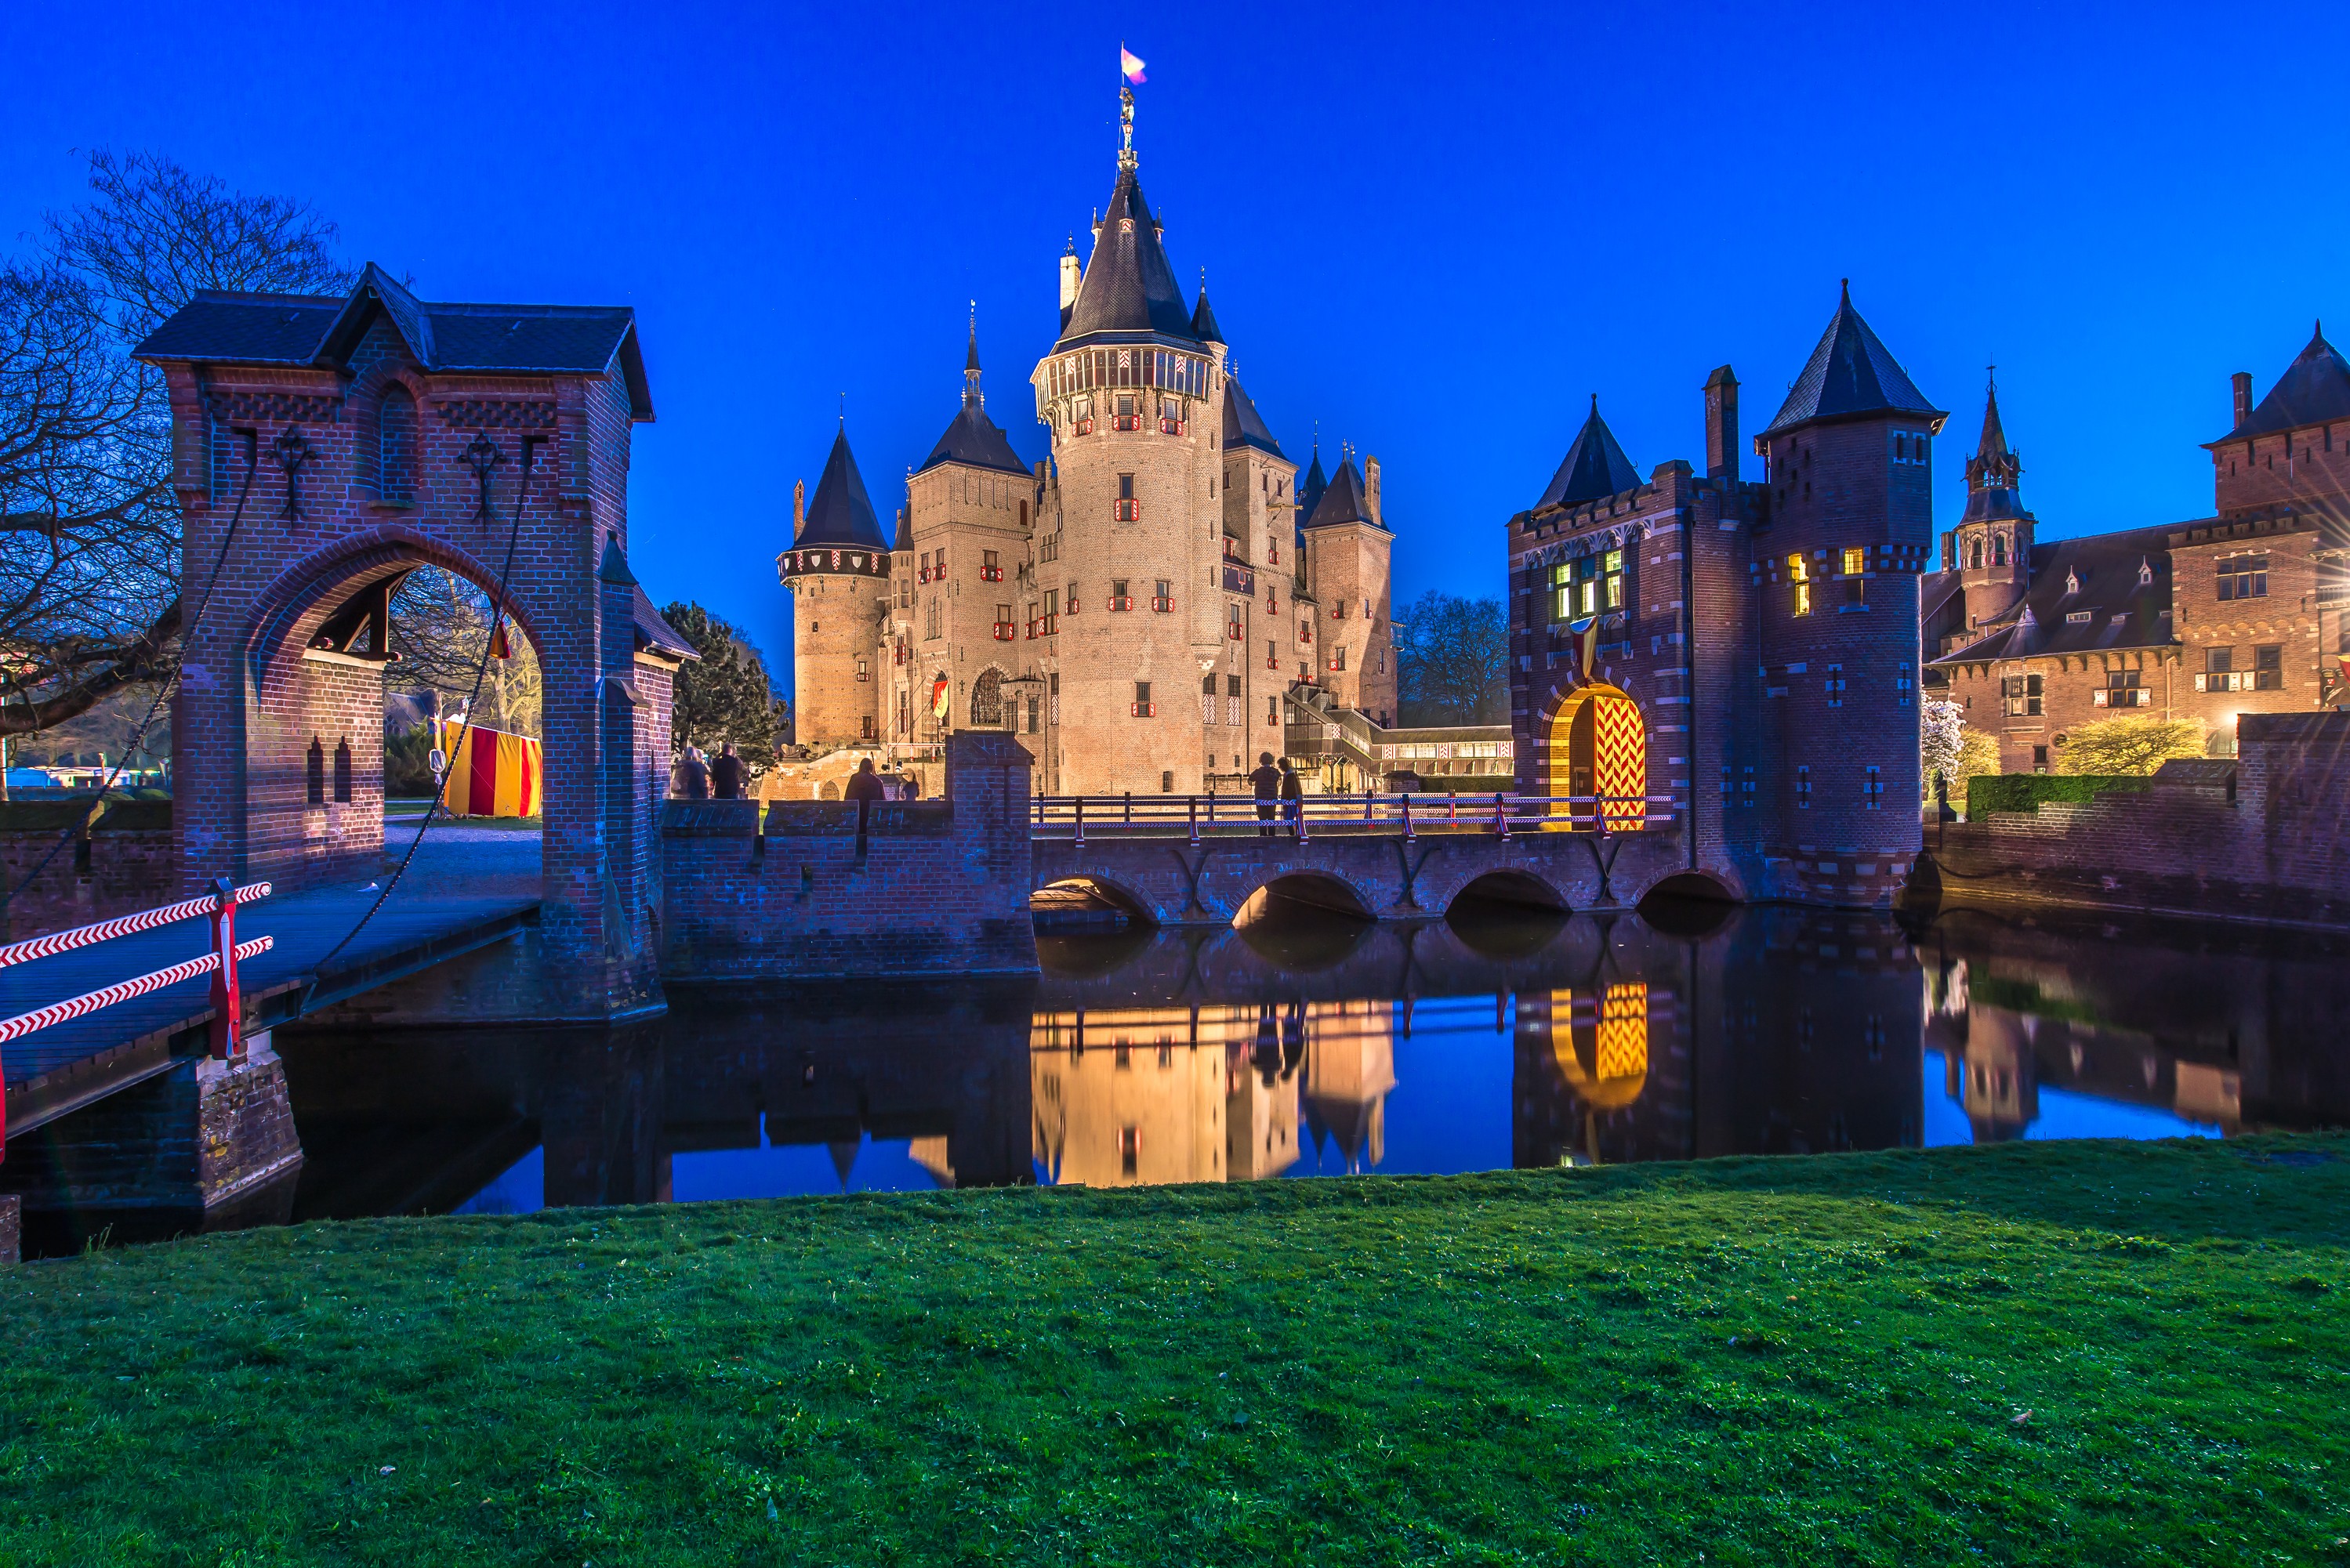 General 2998x2001 architecture castle ancient tower grass Netherlands bridge evening lights arch water reflection